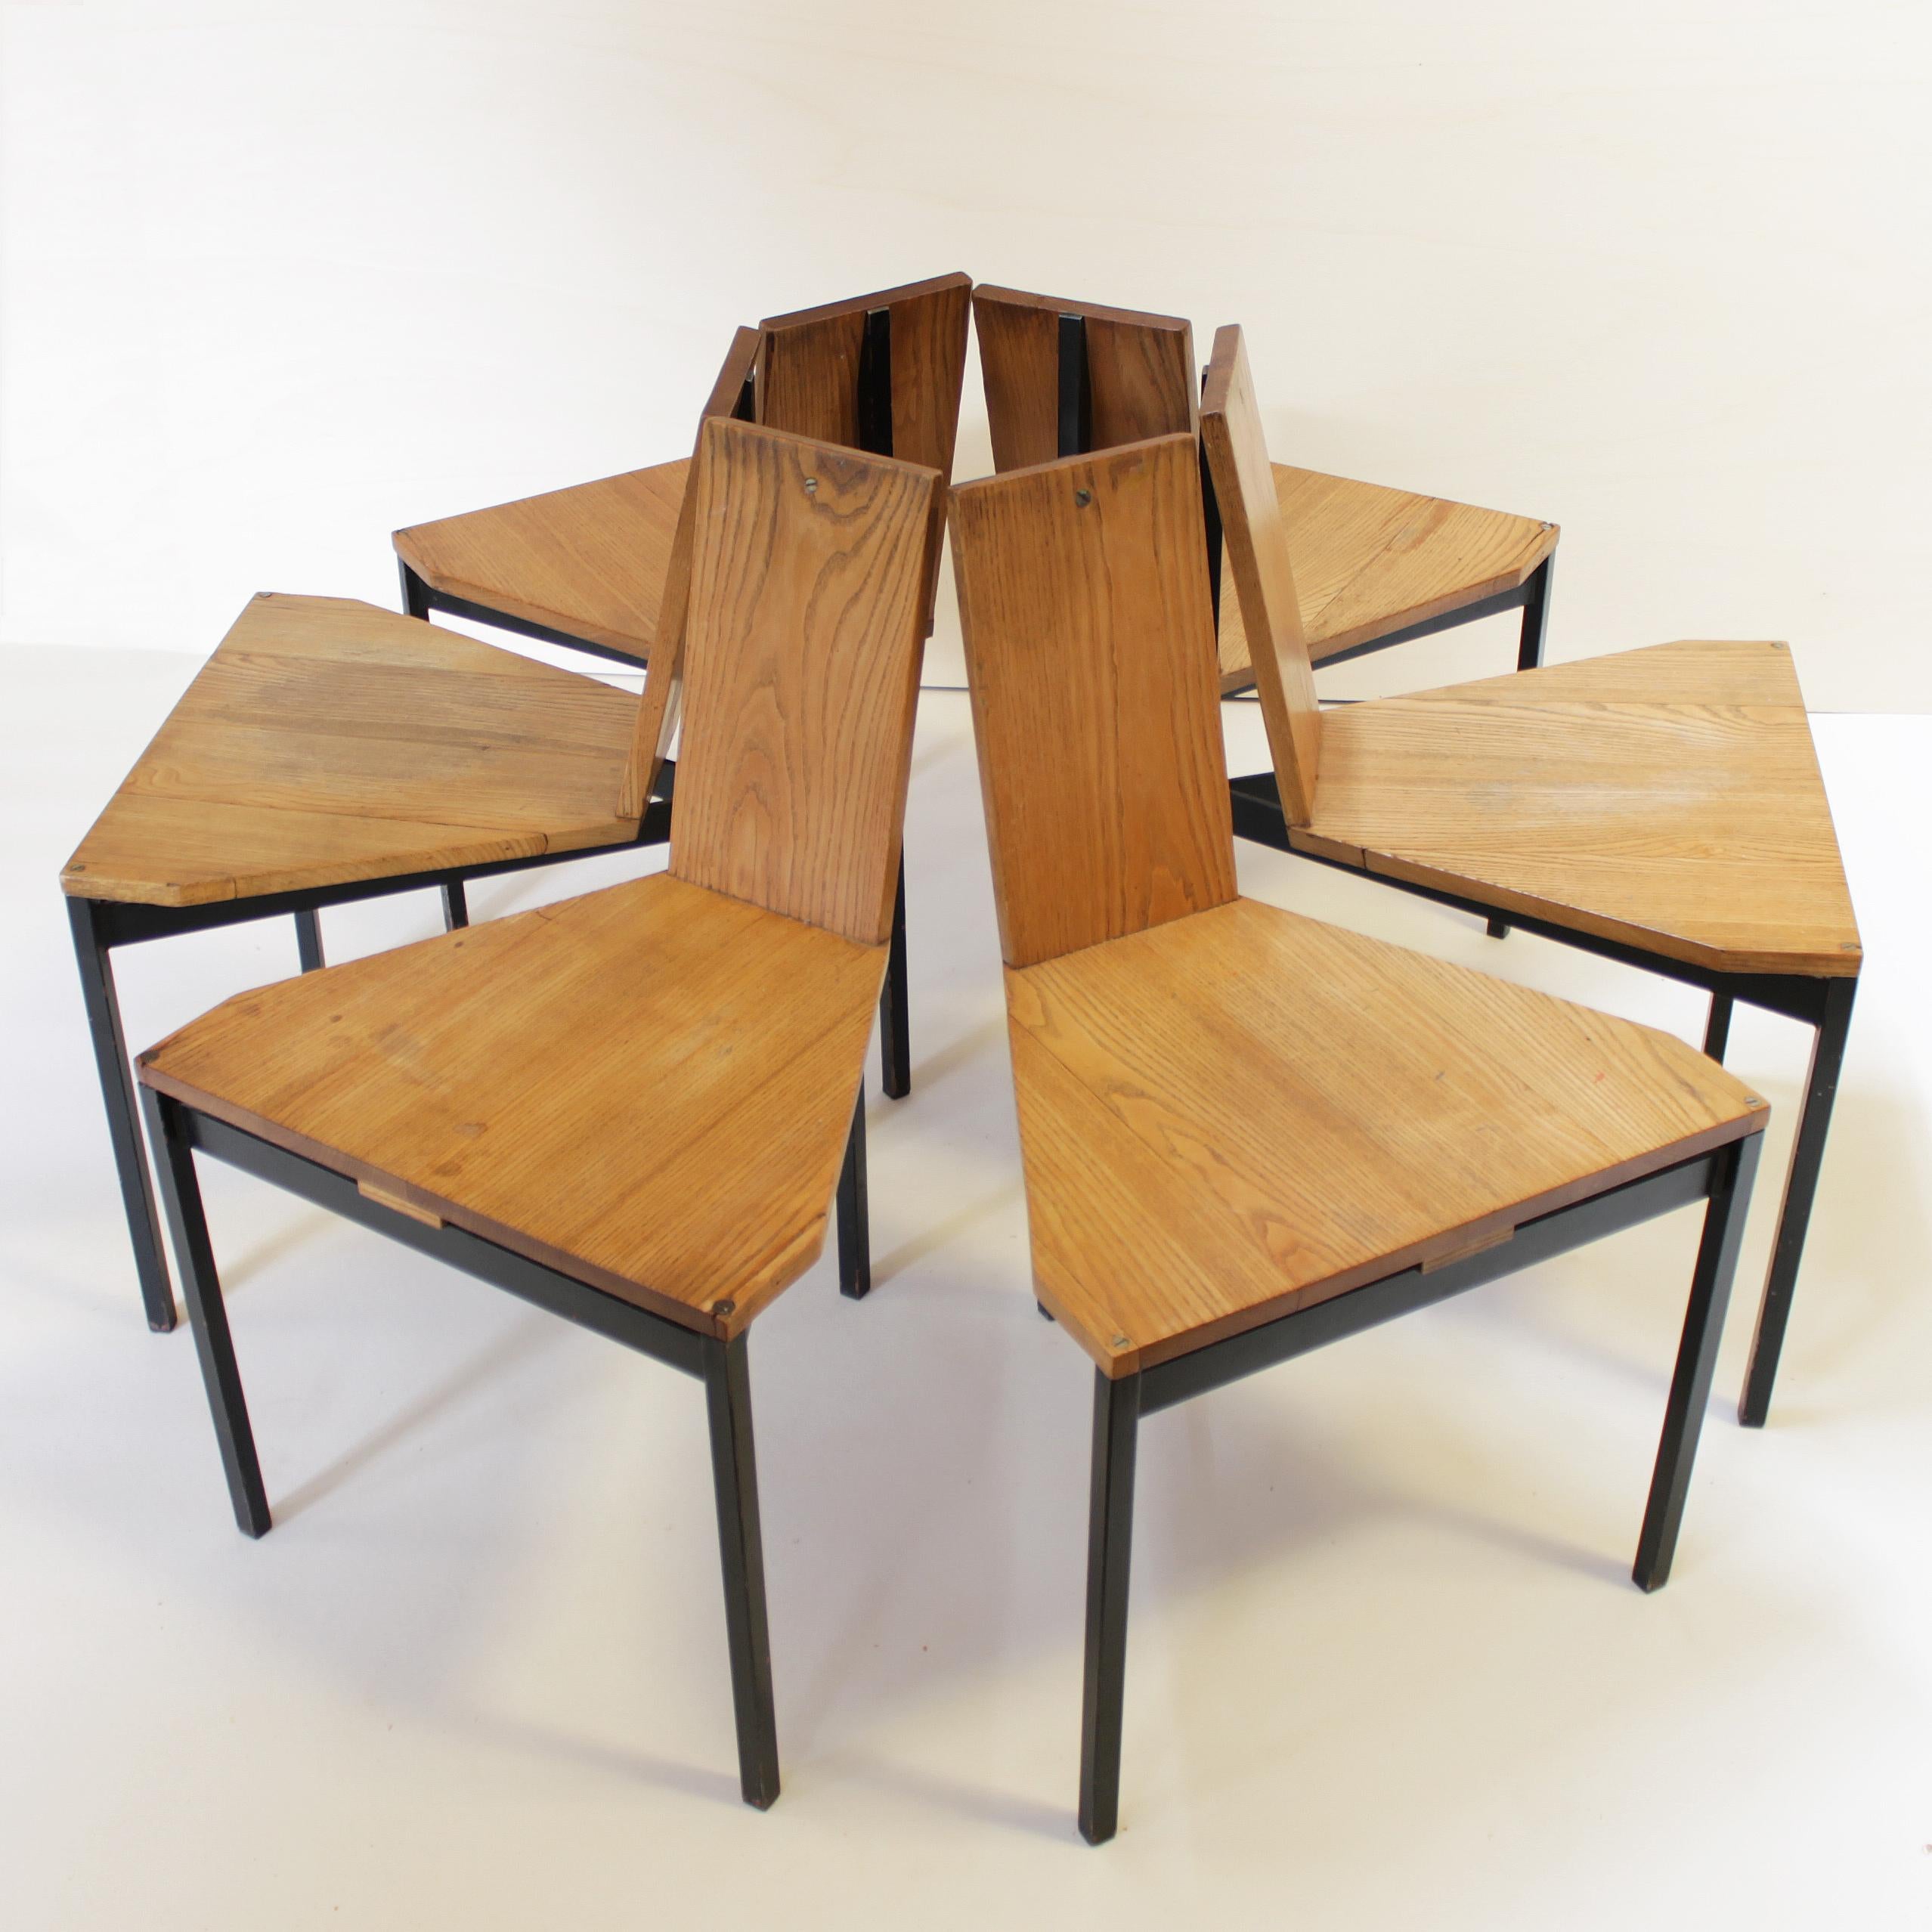 Dining Table and Six '6' Chairs by Wim Den Boon, Netherlands 1958 For Sale 7